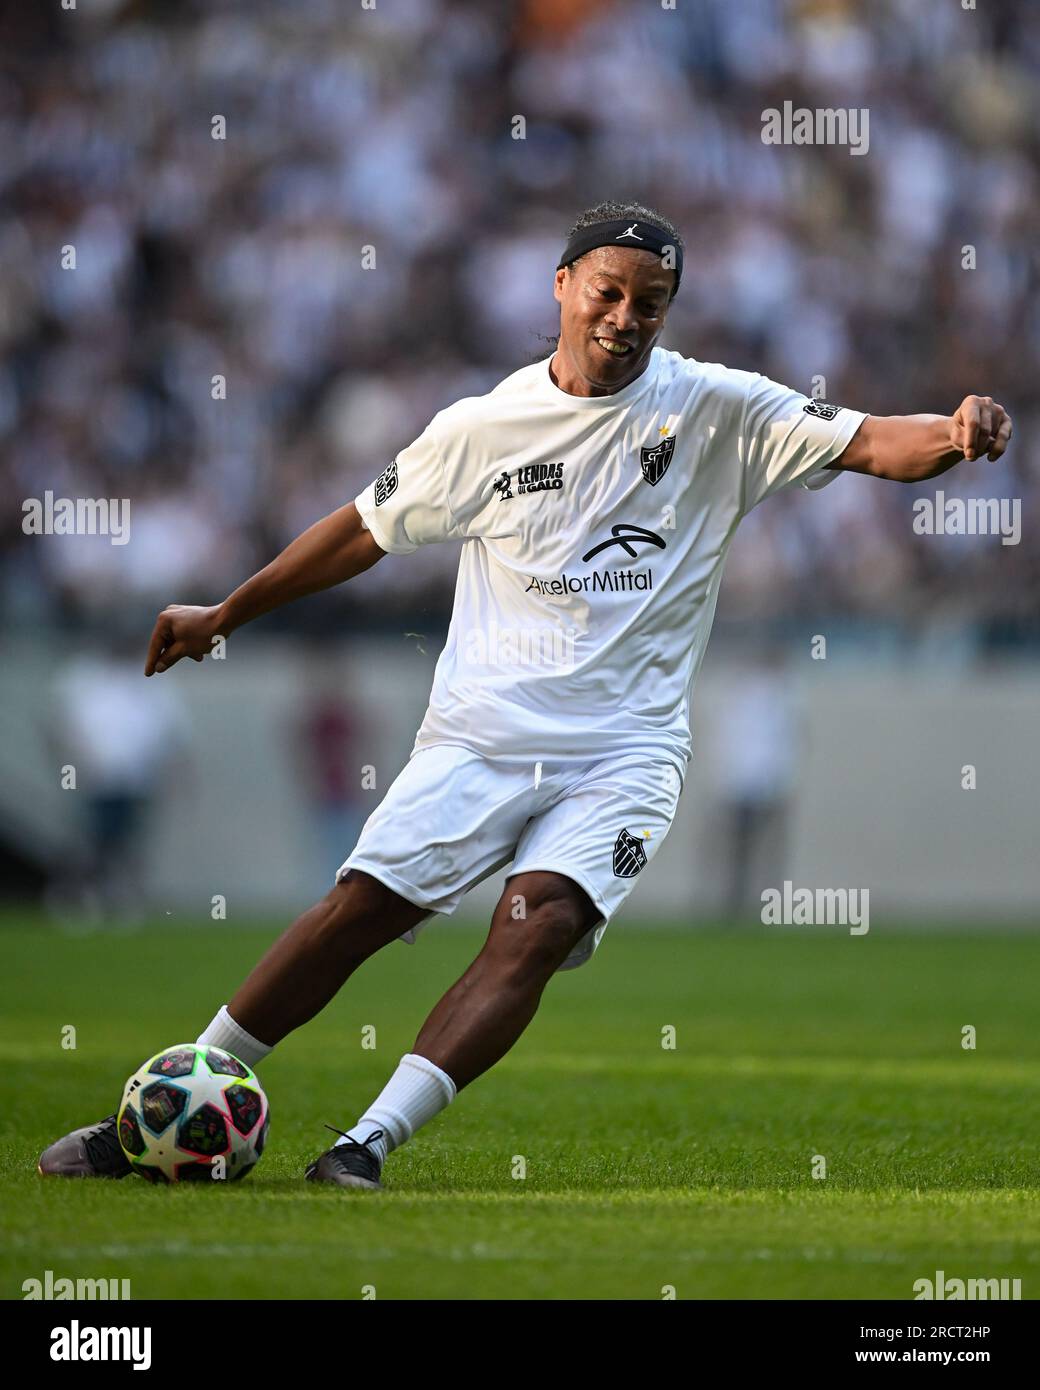 Ronaldinho Gaucho Makes Mold of the Feet To Be Eternalized Editorial Stock  Photo - Image of activity, sport: 136109233